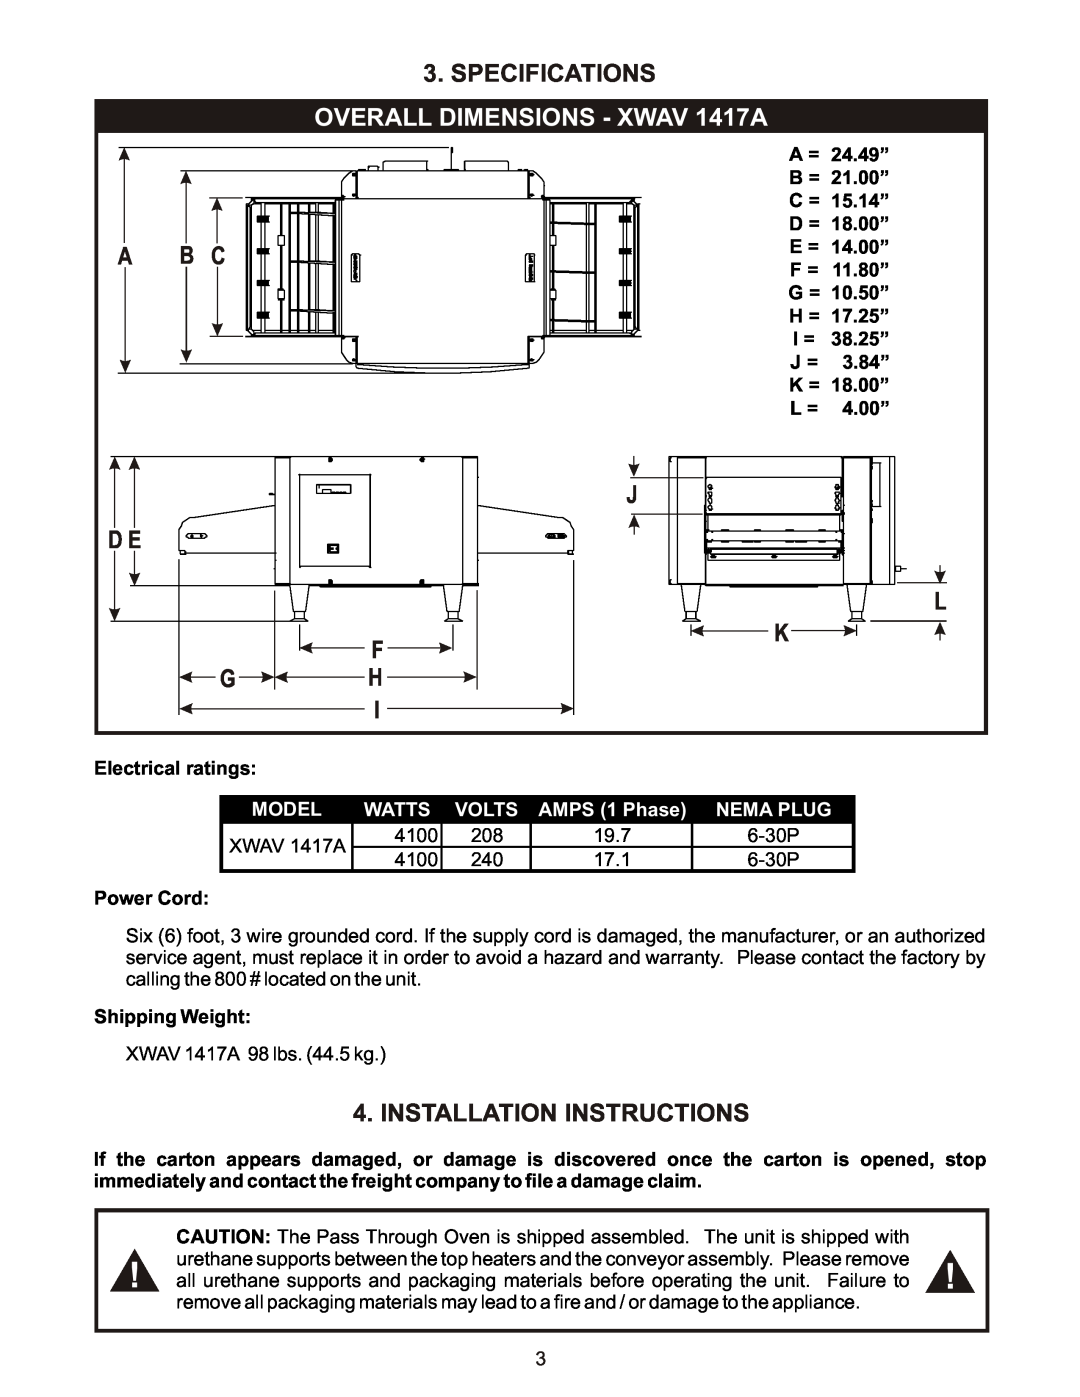 APW Wyott X*WAV 1417A A B C, J D E L, Installation Instructions, SPECIFICATIONS OVERALL DIMENSIONS - XWAV 1417A, Watts 